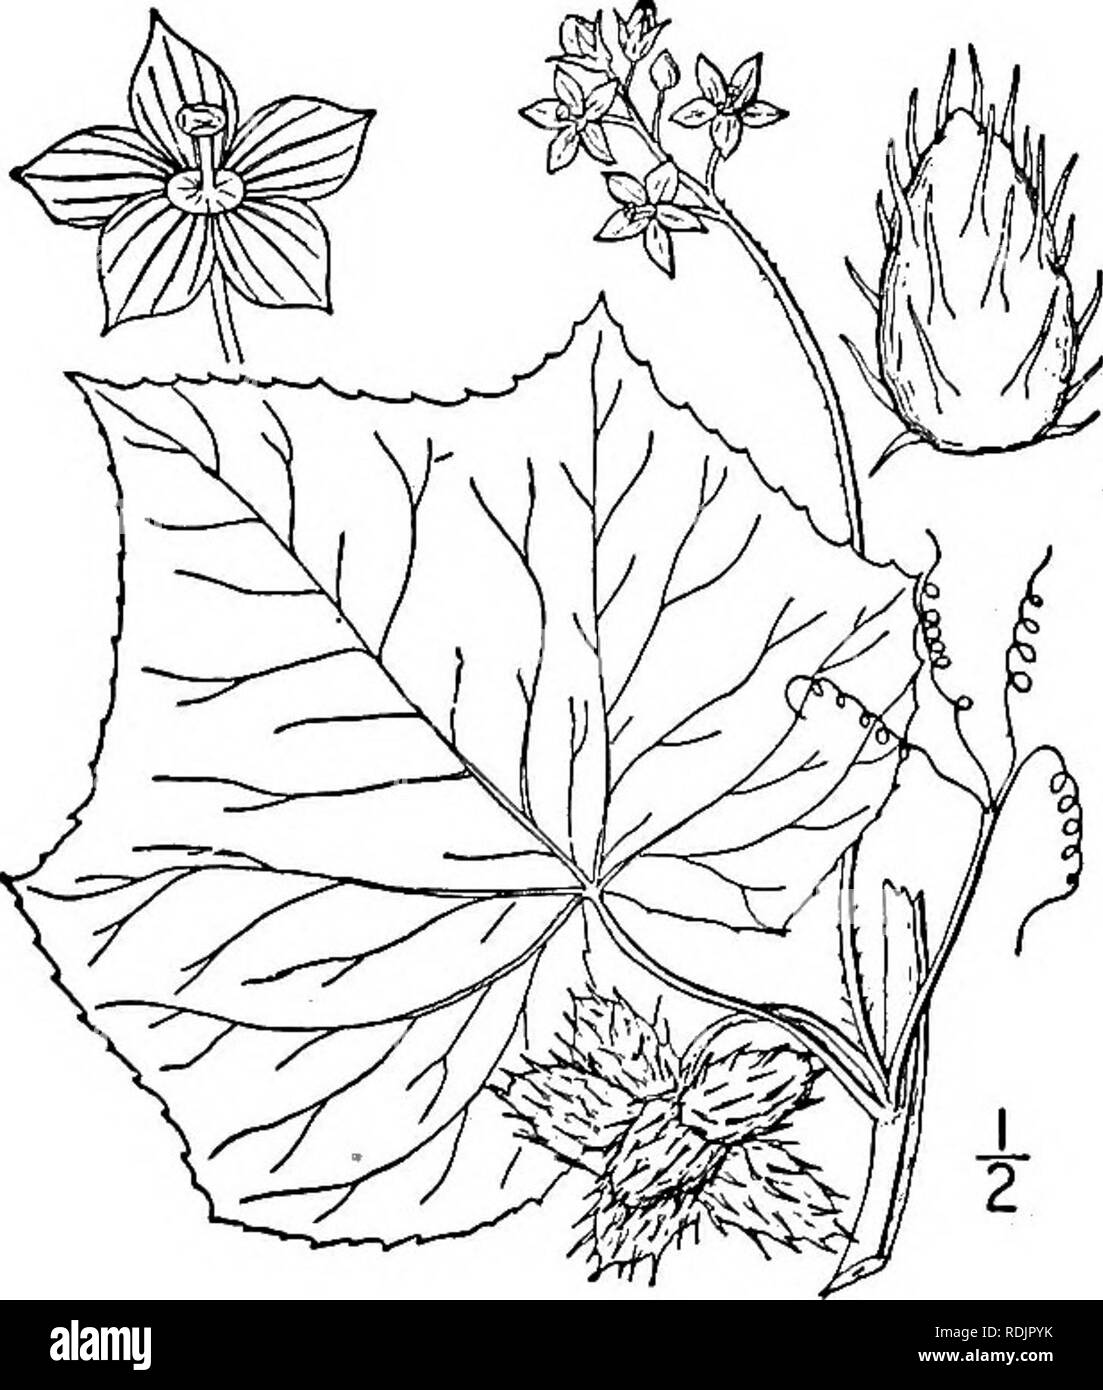 . An illustrated flora of the northern United States, Canada and the British possessions, from Newfoundland to the parallel of the southern boundary of Virginia, and from the Atlantic Ocean westward to the 102d meridian. Botany; Botany. 1. Cyclanthera dissecta (T. &amp; G.) Arn. Cut- leaved Cyclanthera. Fig. 4013. Discanthera dissecta T. &amp; G. Fl. N. A. 1: 697. 1840 Cyclanthera dissecta Arn. in Hook. Journ. Bot. q â 280 1841. Annual; stem grooved and angular, glabrous, branching, climbing to a height of 3Â°-4Â°, or strag- gling. Petioles 1-2' long; leaves digitately 3-7- foliolate, the leaf Stock Photo